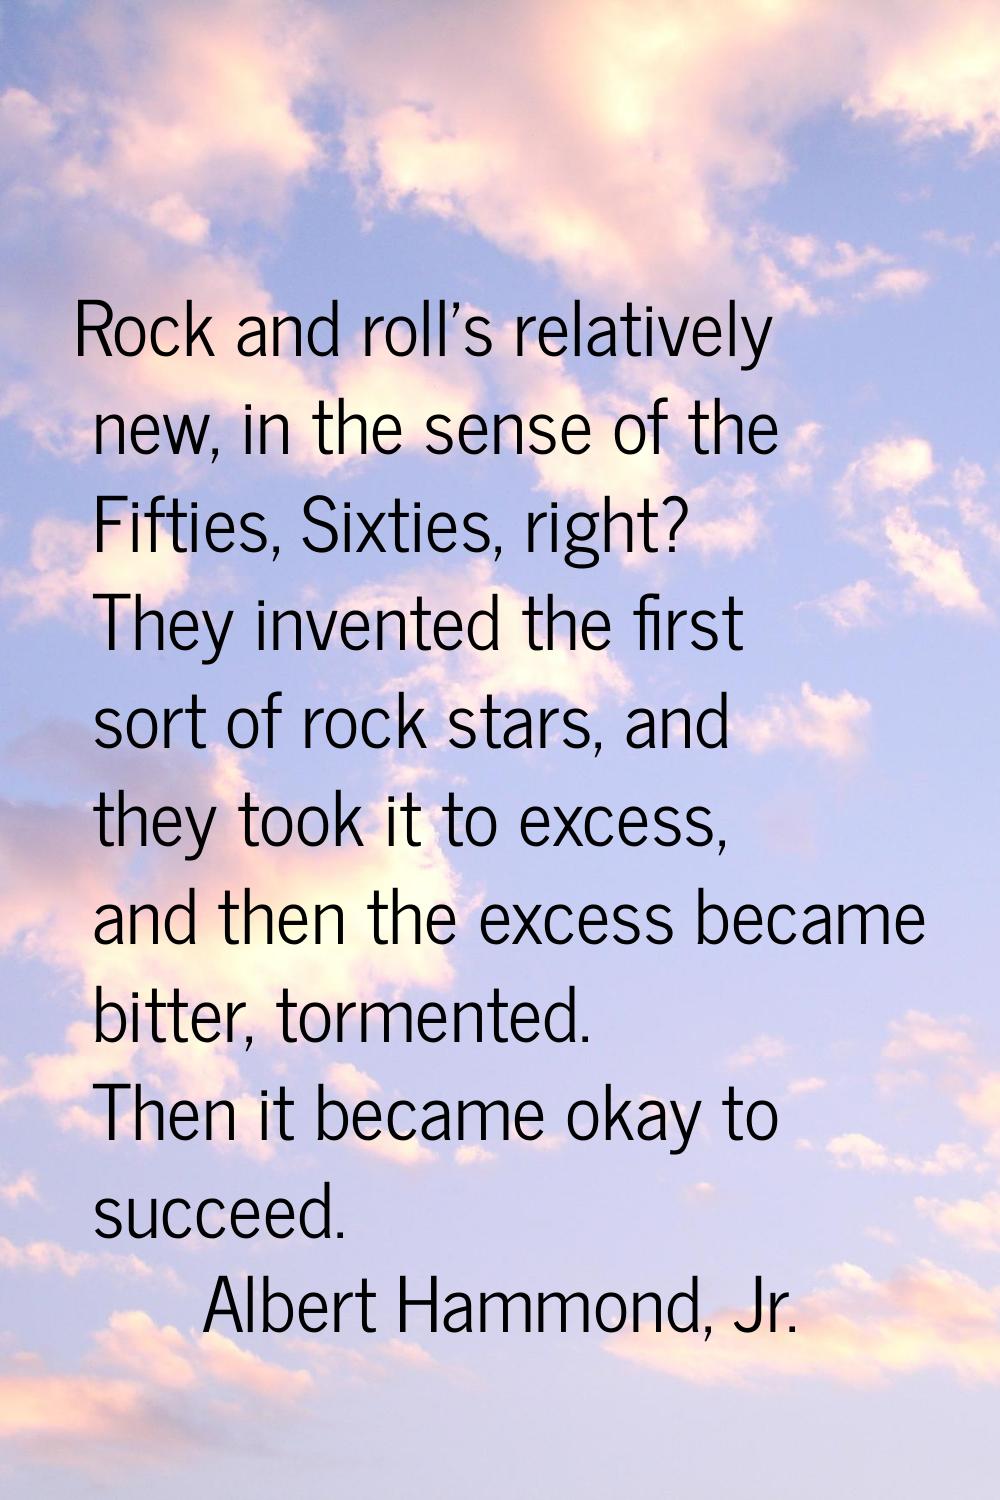 Rock and roll's relatively new, in the sense of the Fifties, Sixties, right? They invented the firs